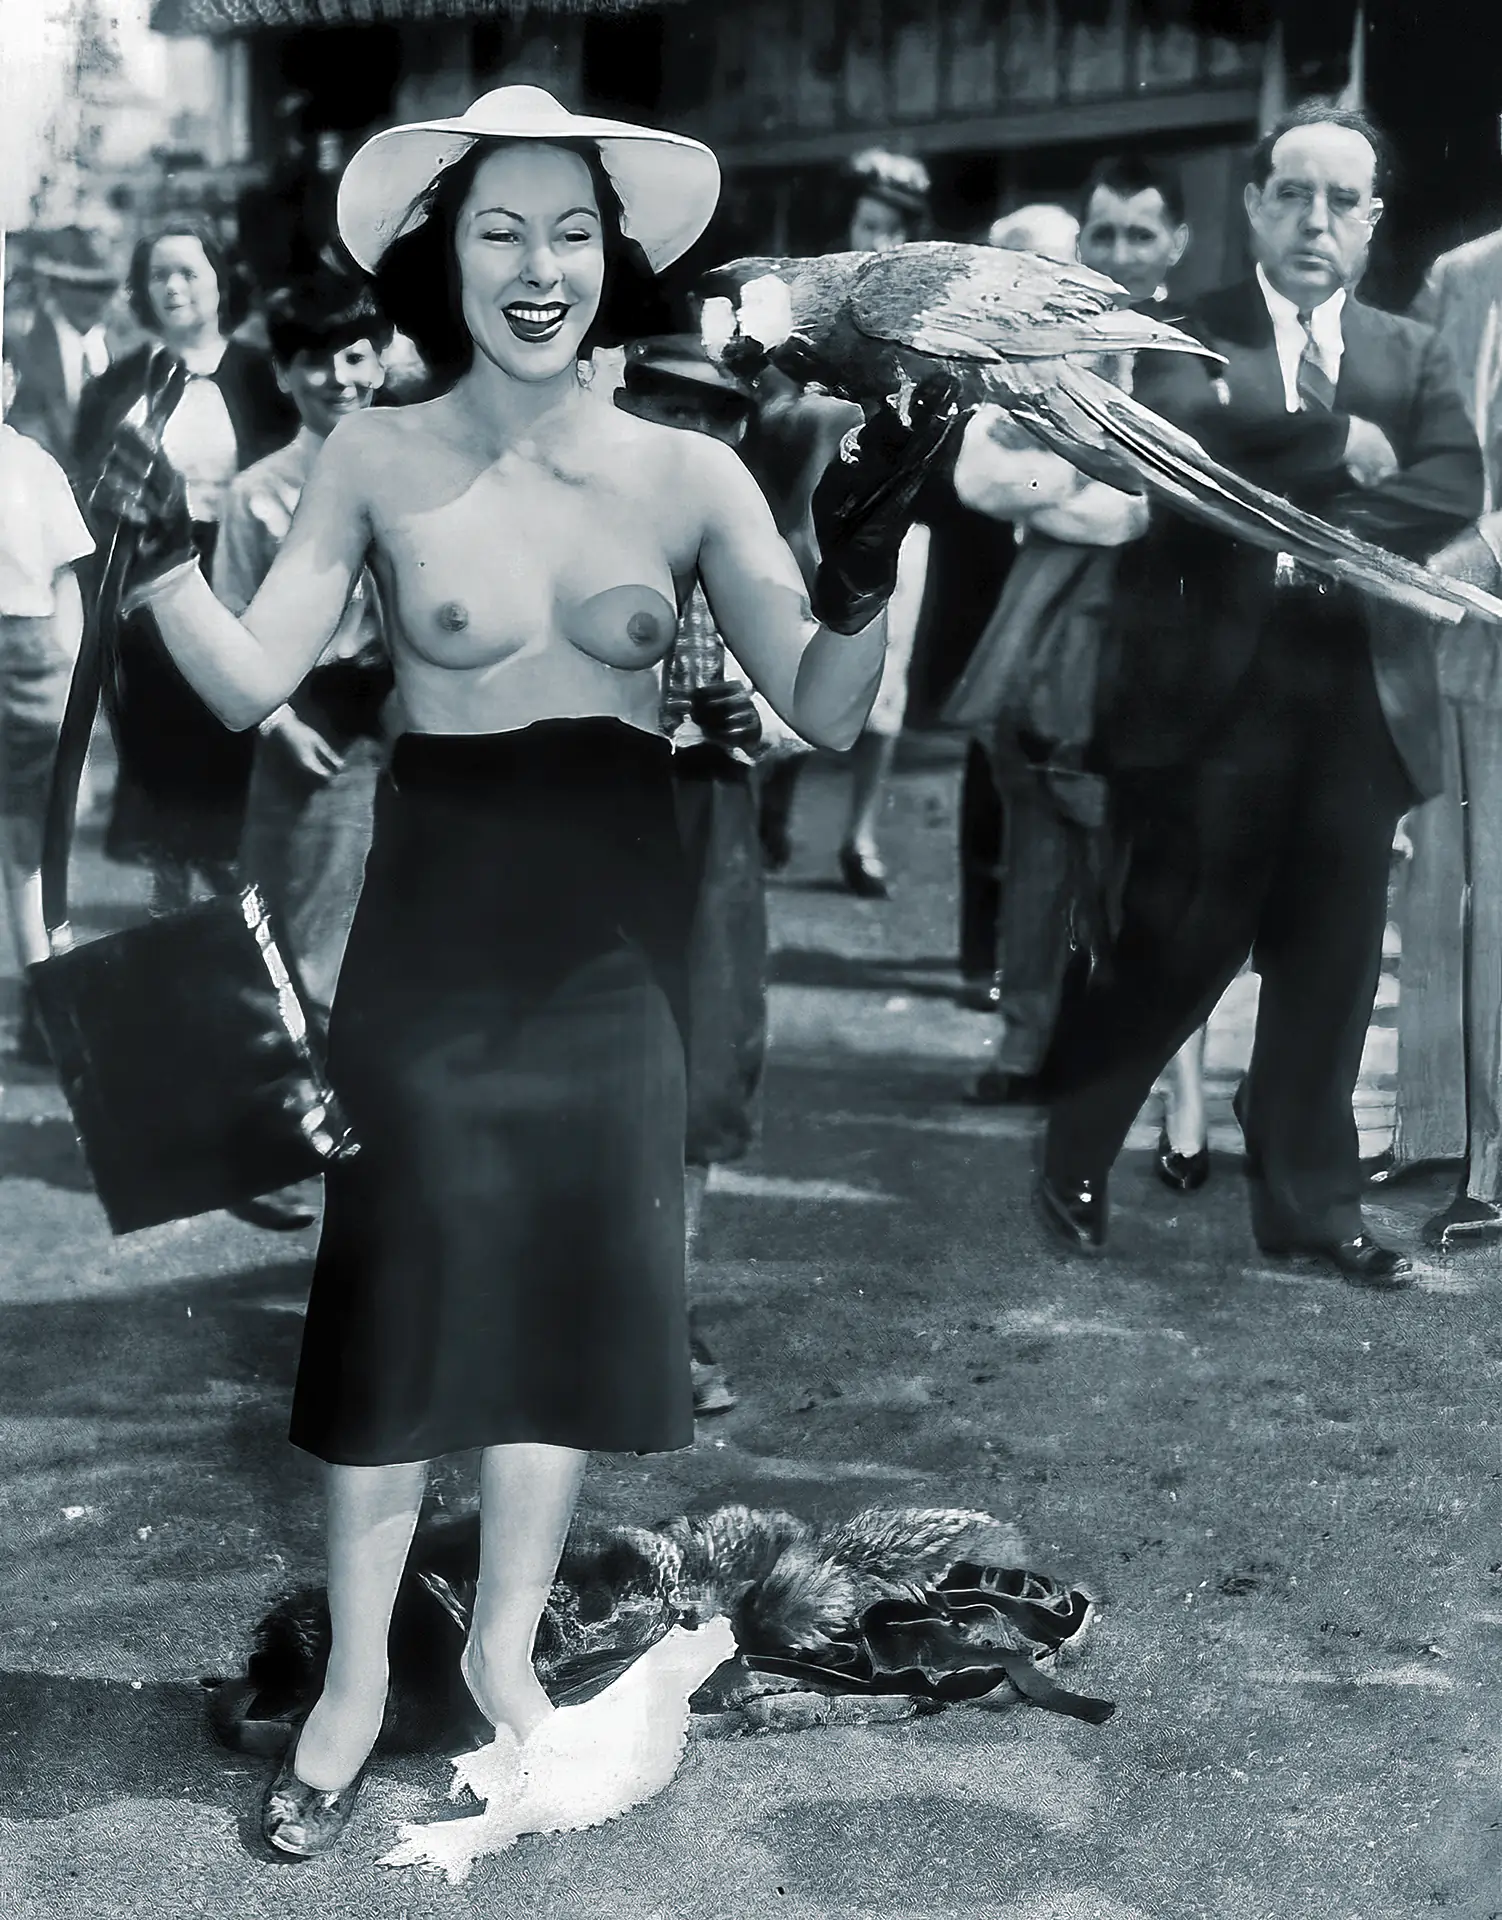 Vintage topless porn photos with bare-breasted woman with a hat and skirt standing in a crowded street outdoors with a parrot in her hand